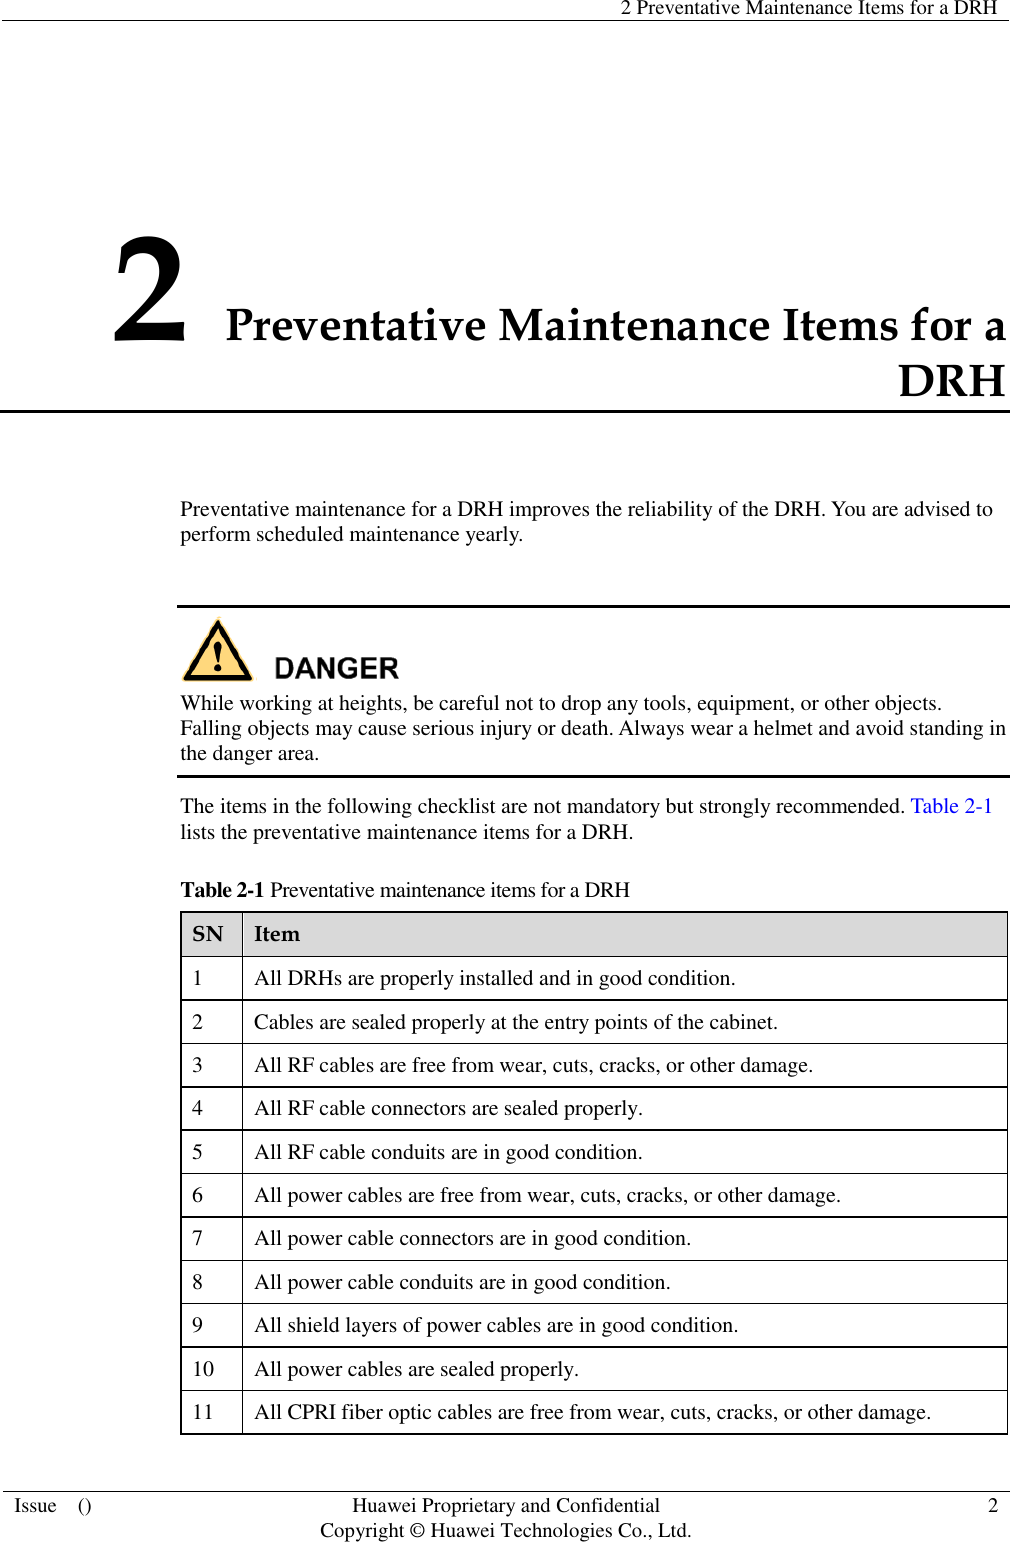   2 Preventative Maintenance Items for a DRH  Issue    () Huawei Proprietary and Confidential                                     Copyright © Huawei Technologies Co., Ltd. 2  2 Preventative Maintenance Items for a DRH Preventative maintenance for a DRH improves the reliability of the DRH. You are advised to perform scheduled maintenance yearly.   While working at heights, be careful not to drop any tools, equipment, or other objects. Falling objects may cause serious injury or death. Always wear a helmet and avoid standing in the danger area. The items in the following checklist are not mandatory but strongly recommended. Table 2-1 lists the preventative maintenance items for a DRH. Table 2-1 Preventative maintenance items for a DRH SN Item 1 All DRHs are properly installed and in good condition. 2 Cables are sealed properly at the entry points of the cabinet. 3 All RF cables are free from wear, cuts, cracks, or other damage. 4 All RF cable connectors are sealed properly. 5 All RF cable conduits are in good condition. 6 All power cables are free from wear, cuts, cracks, or other damage. 7 All power cable connectors are in good condition. 8 All power cable conduits are in good condition. 9 All shield layers of power cables are in good condition. 10 All power cables are sealed properly. 11 All CPRI fiber optic cables are free from wear, cuts, cracks, or other damage. 